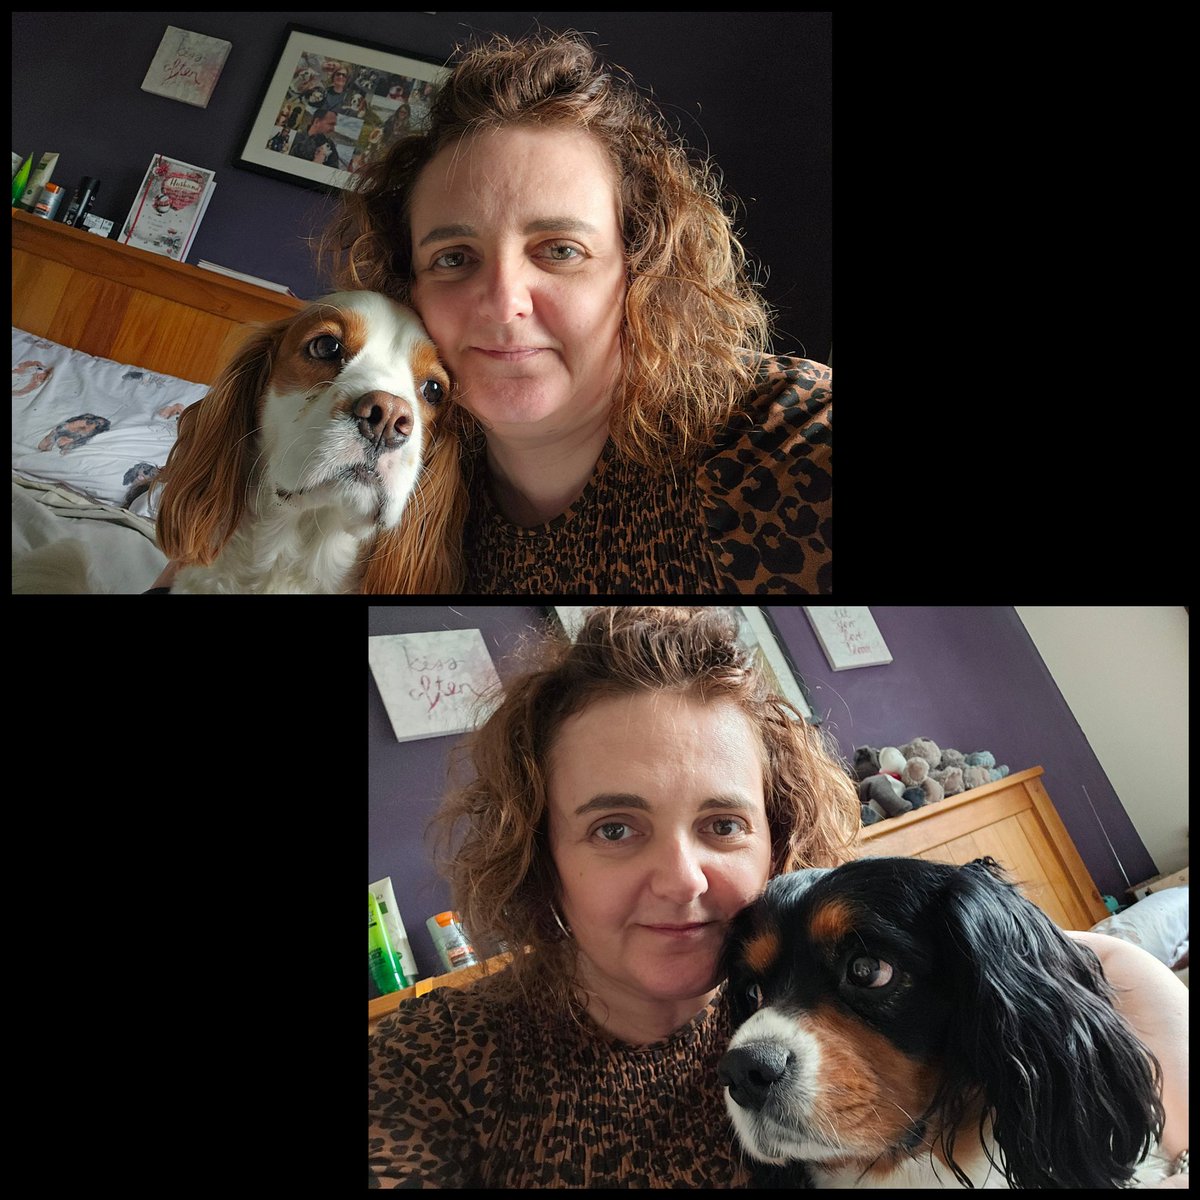 After a very mentally tiring day, cuddles with the boys was just what I needed this eve 😍 #cavpack #dogsarelove